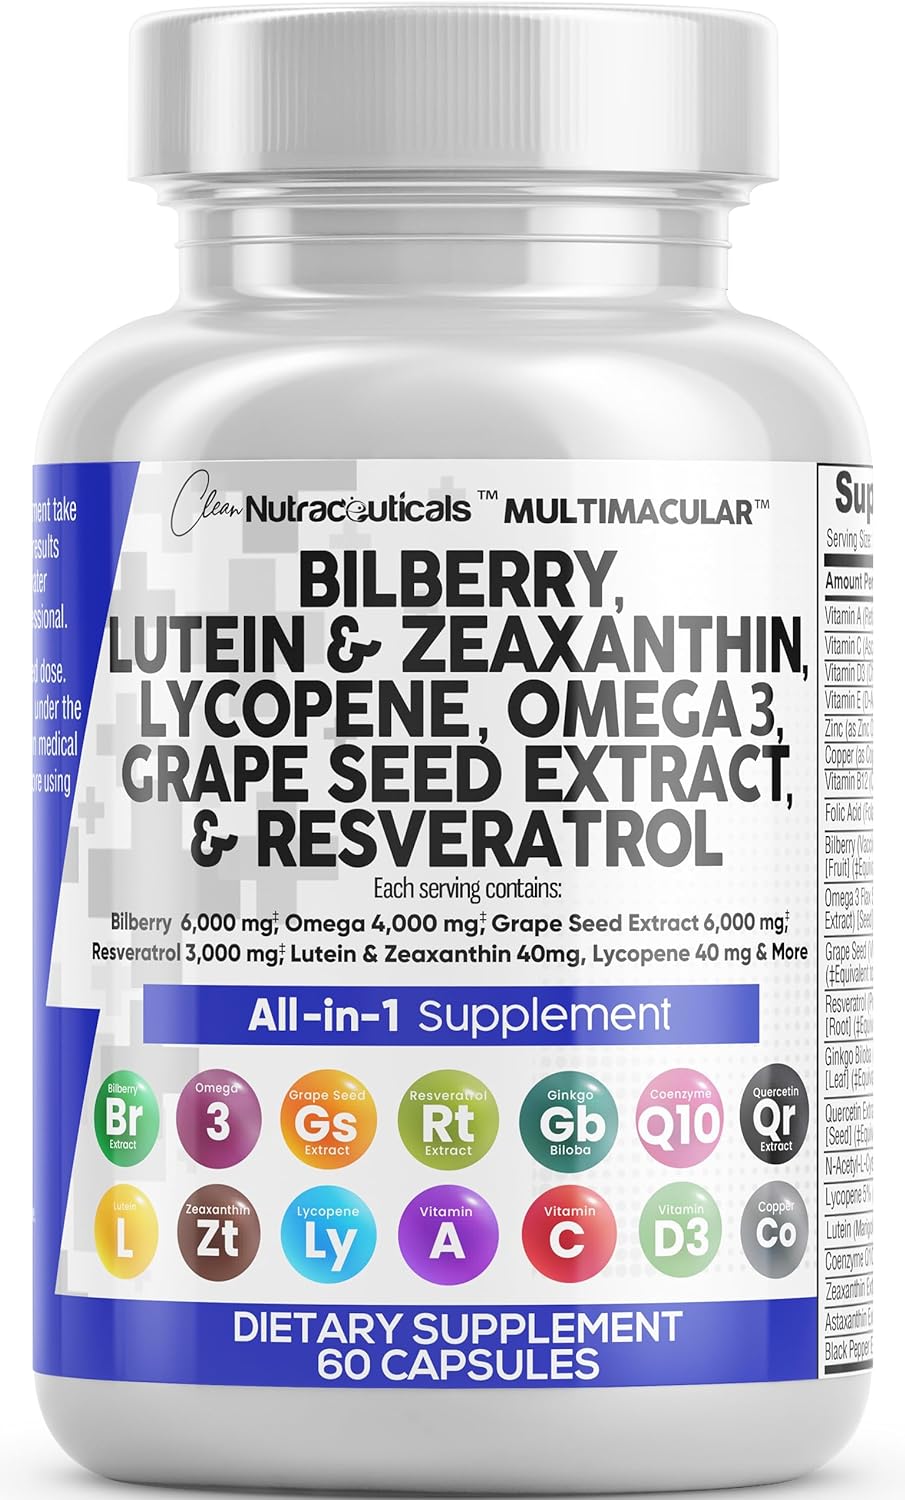 Clean Nutraceuticals Eye Health Vitamins with Bilberry 6000mg Lutein & Zeaxanthin 40mg Lycopene 40mg Resveratrol 3000mg Grape Seed Extract 6000mg Omega 3 4000mg Astaxanthin - Eye Vitamin - 60 Capsules